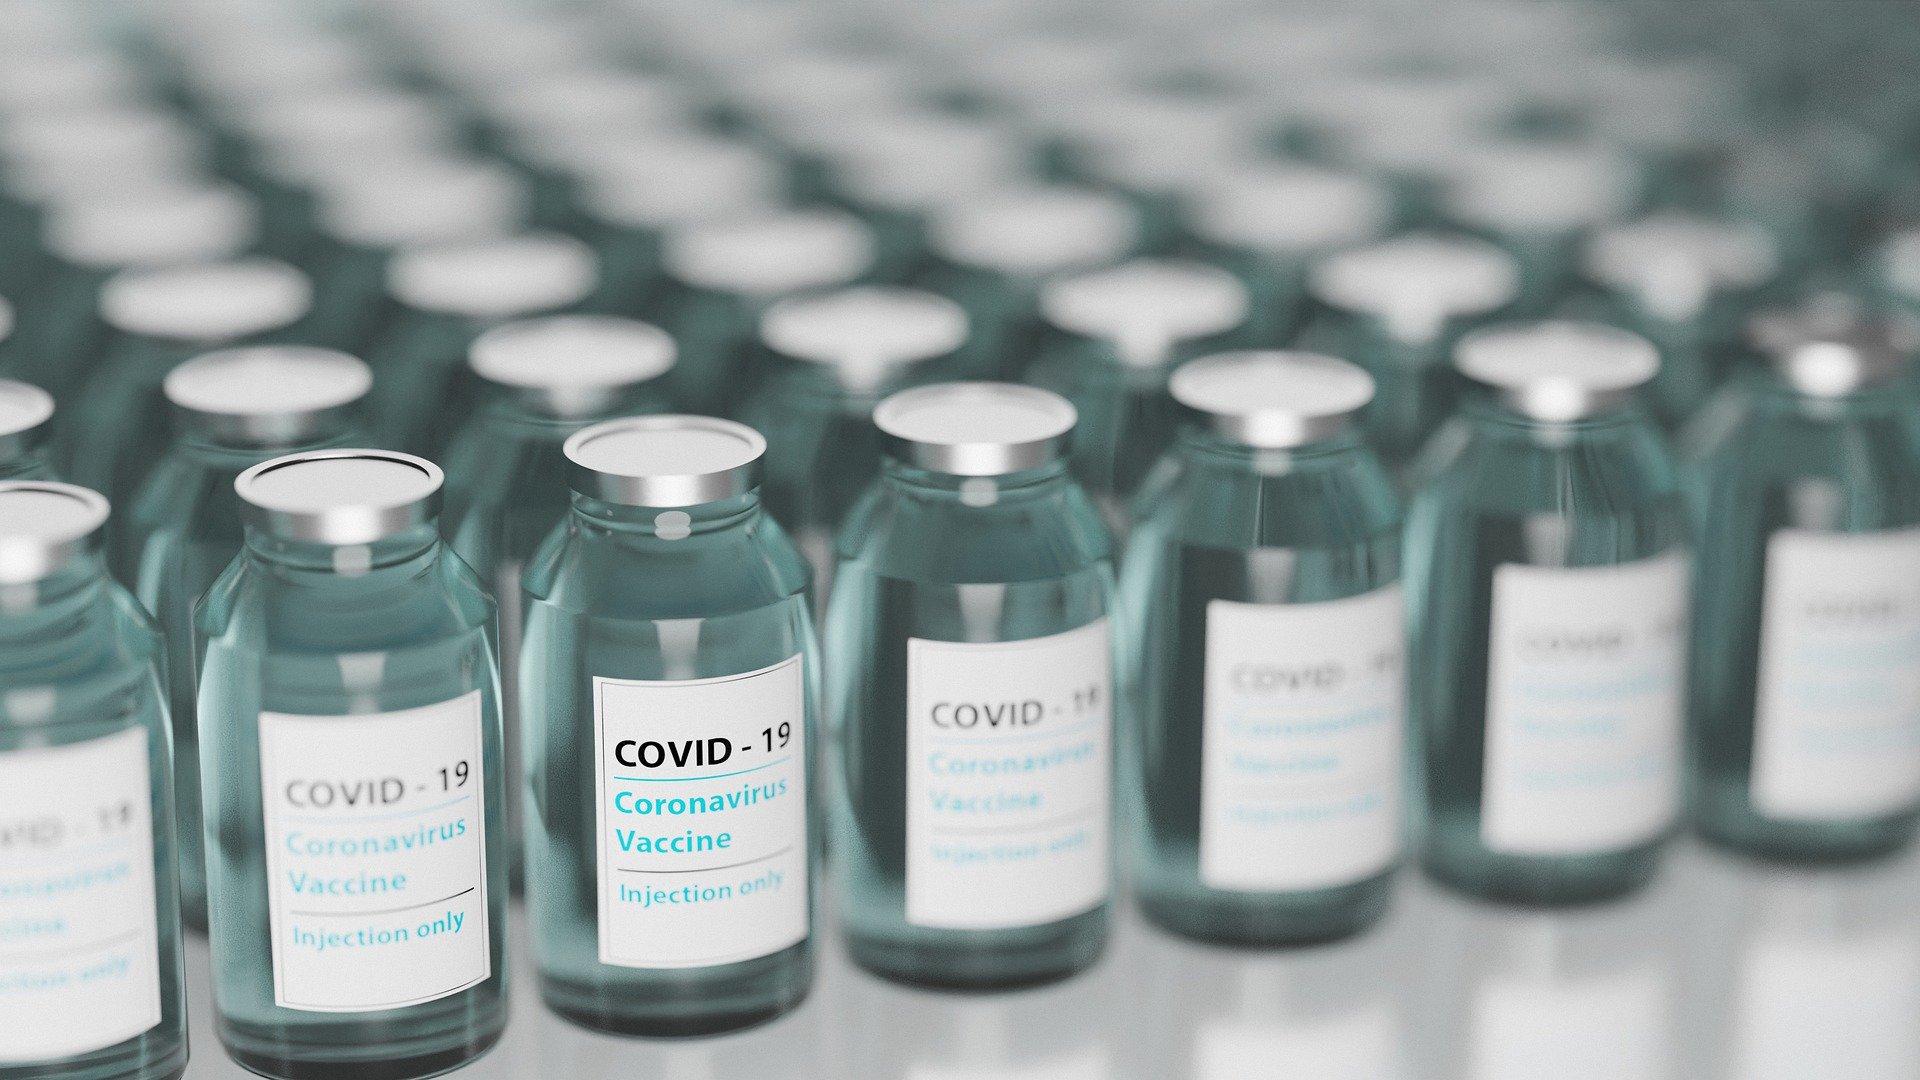 ‘Do I Really Need the Second Dose?’: Why Getting the COVID Vaccine Booster Makes All the Difference